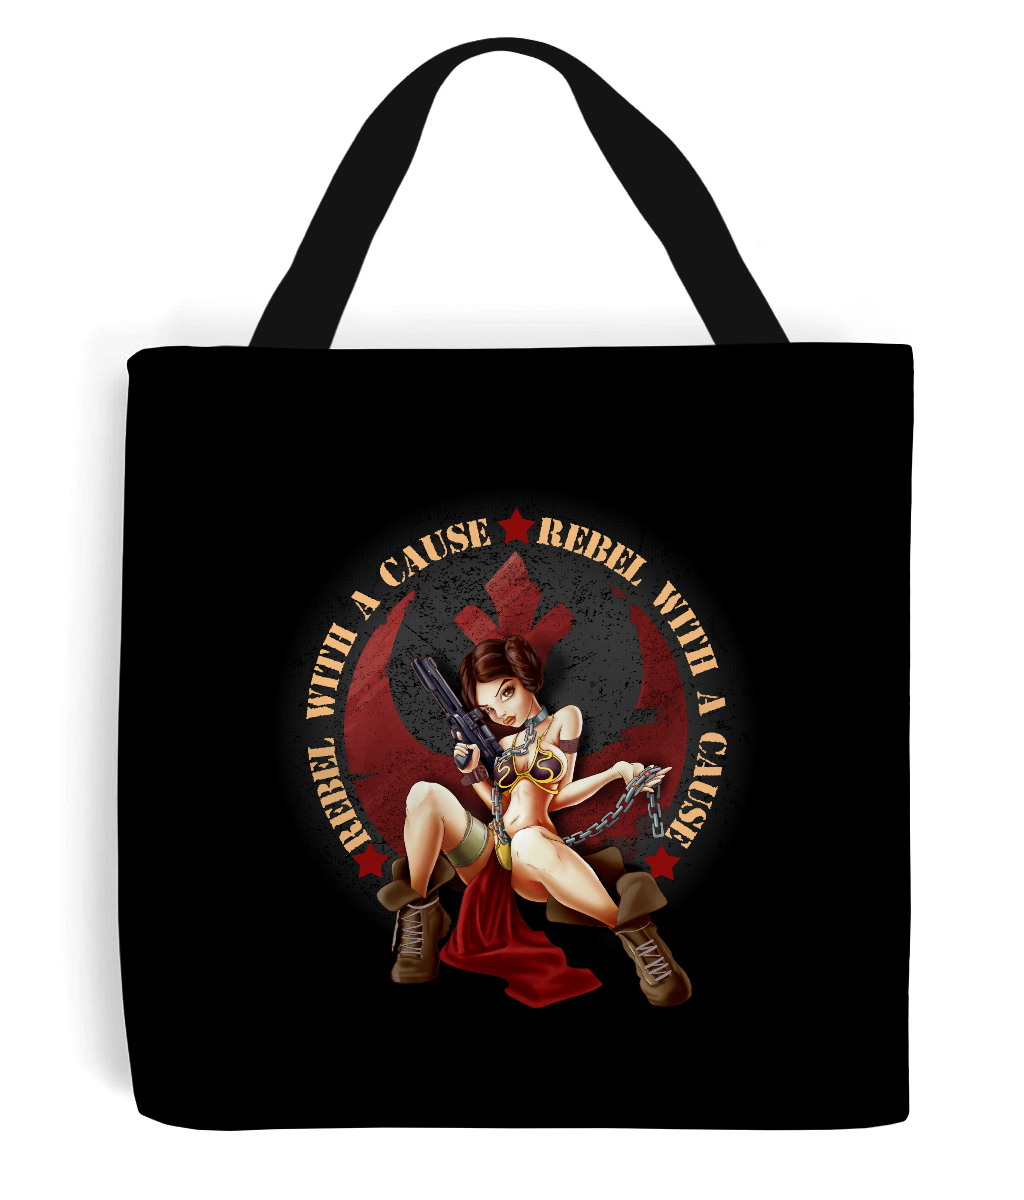 star wars rebel with a cause tote bag